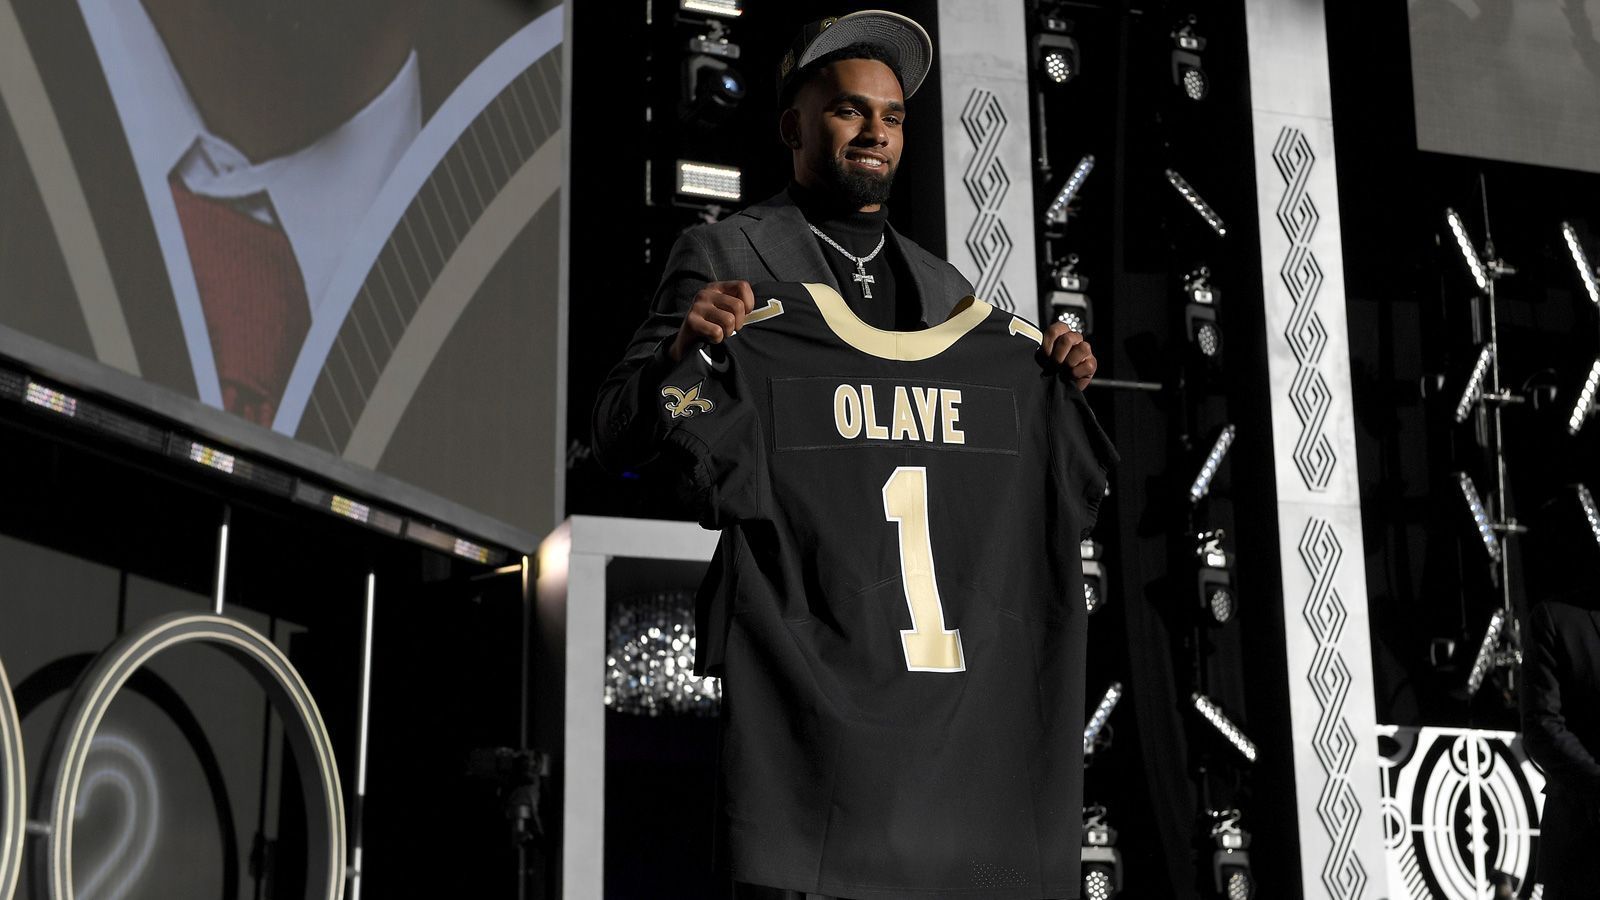 
                <strong>New Orleans Saints</strong><br>
                &#x2022; 11. Pick (Runde 1): Chris Olave (WR, Ohio State)<br>&#x2022; 19. Pick (Runde 1): Trevor Penning (OT, Nothern Iowa)<br>&#x2022; 17. Pick (Runde 2): Alontae Taylor (CB, Tennessee)<br>&#x2022; 18. Pick (Runde 5): D'Marco Jackson (ILB, Appalachian State)<br>&#x2022; 15. Pick (Runde 6): Jordan Jackson (DT, Air Force)<br>
              